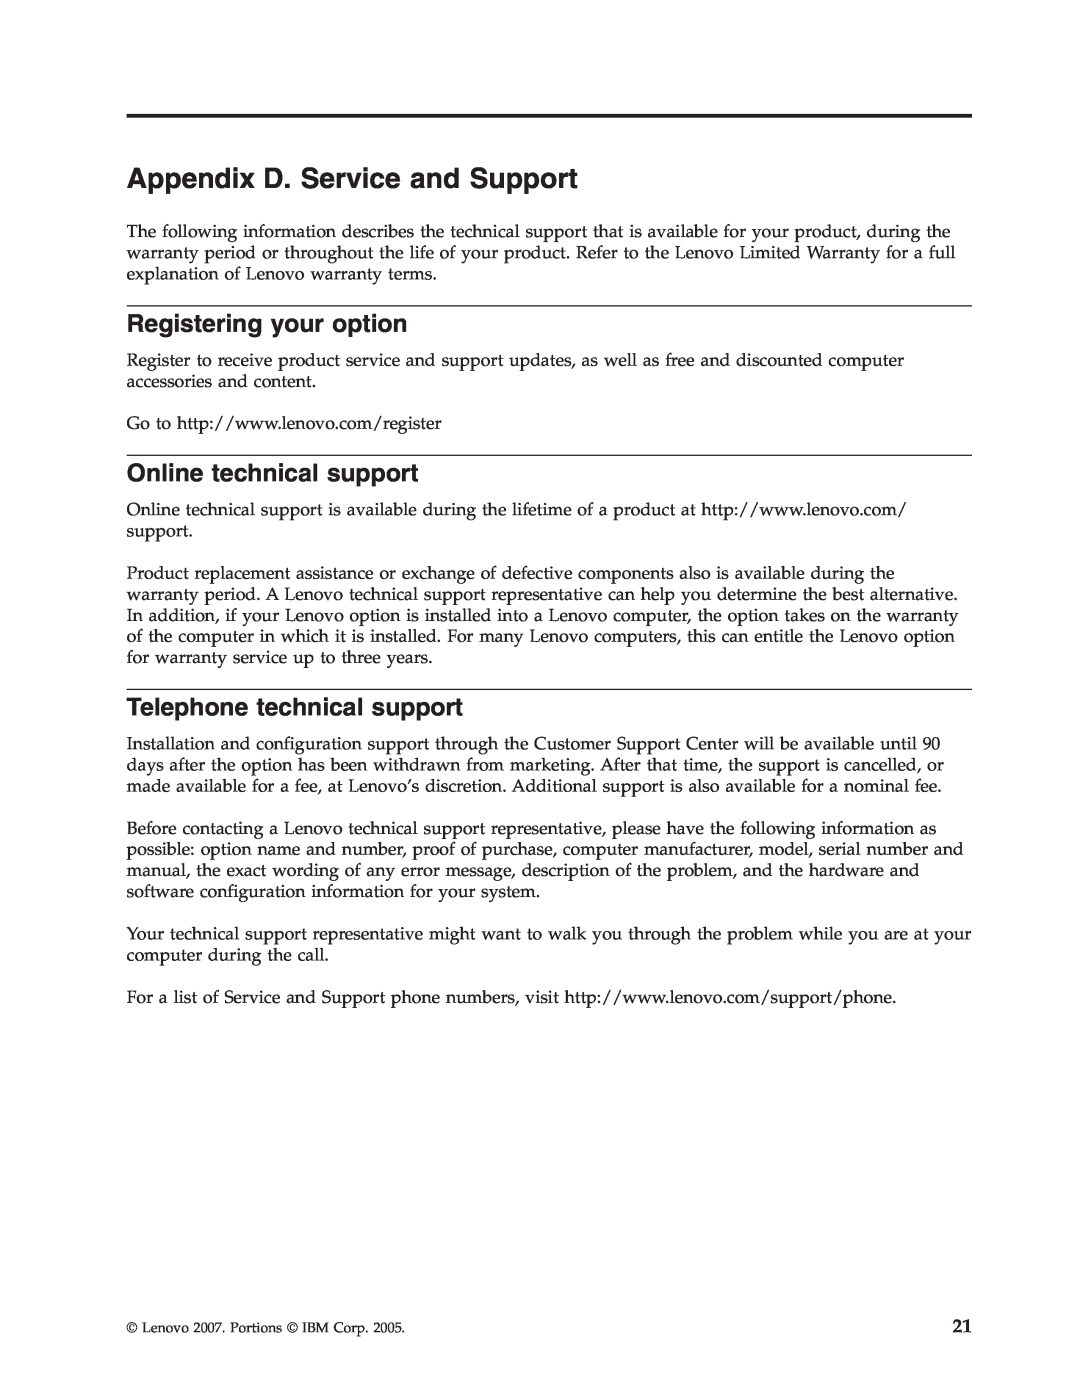 Lenovo 41N5647 manual Appendix D. Service and Support, Registering your option, Online technical support 